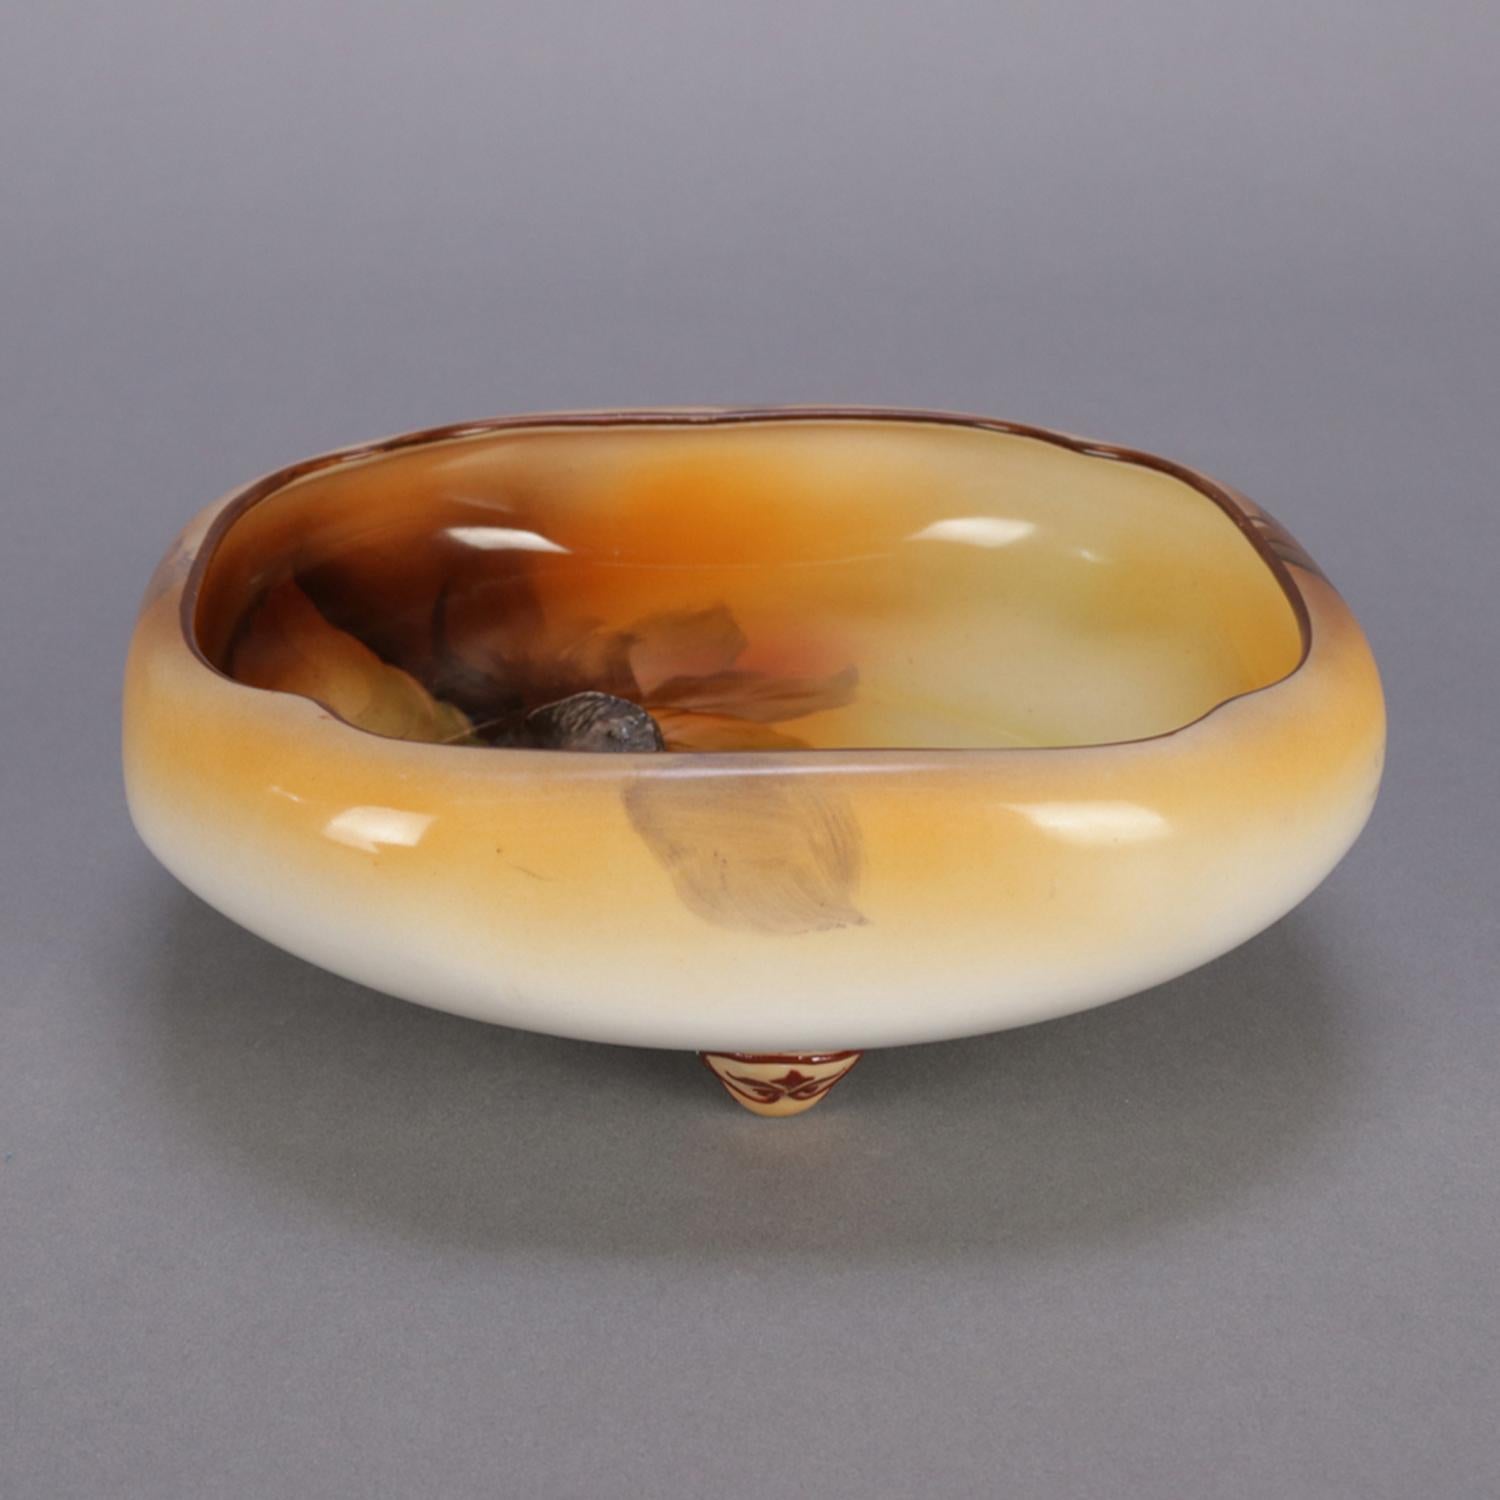 Japanese Antique Noritake Hand Painted Nut and Leaf Porcelain Footed Bowl, 19th Century